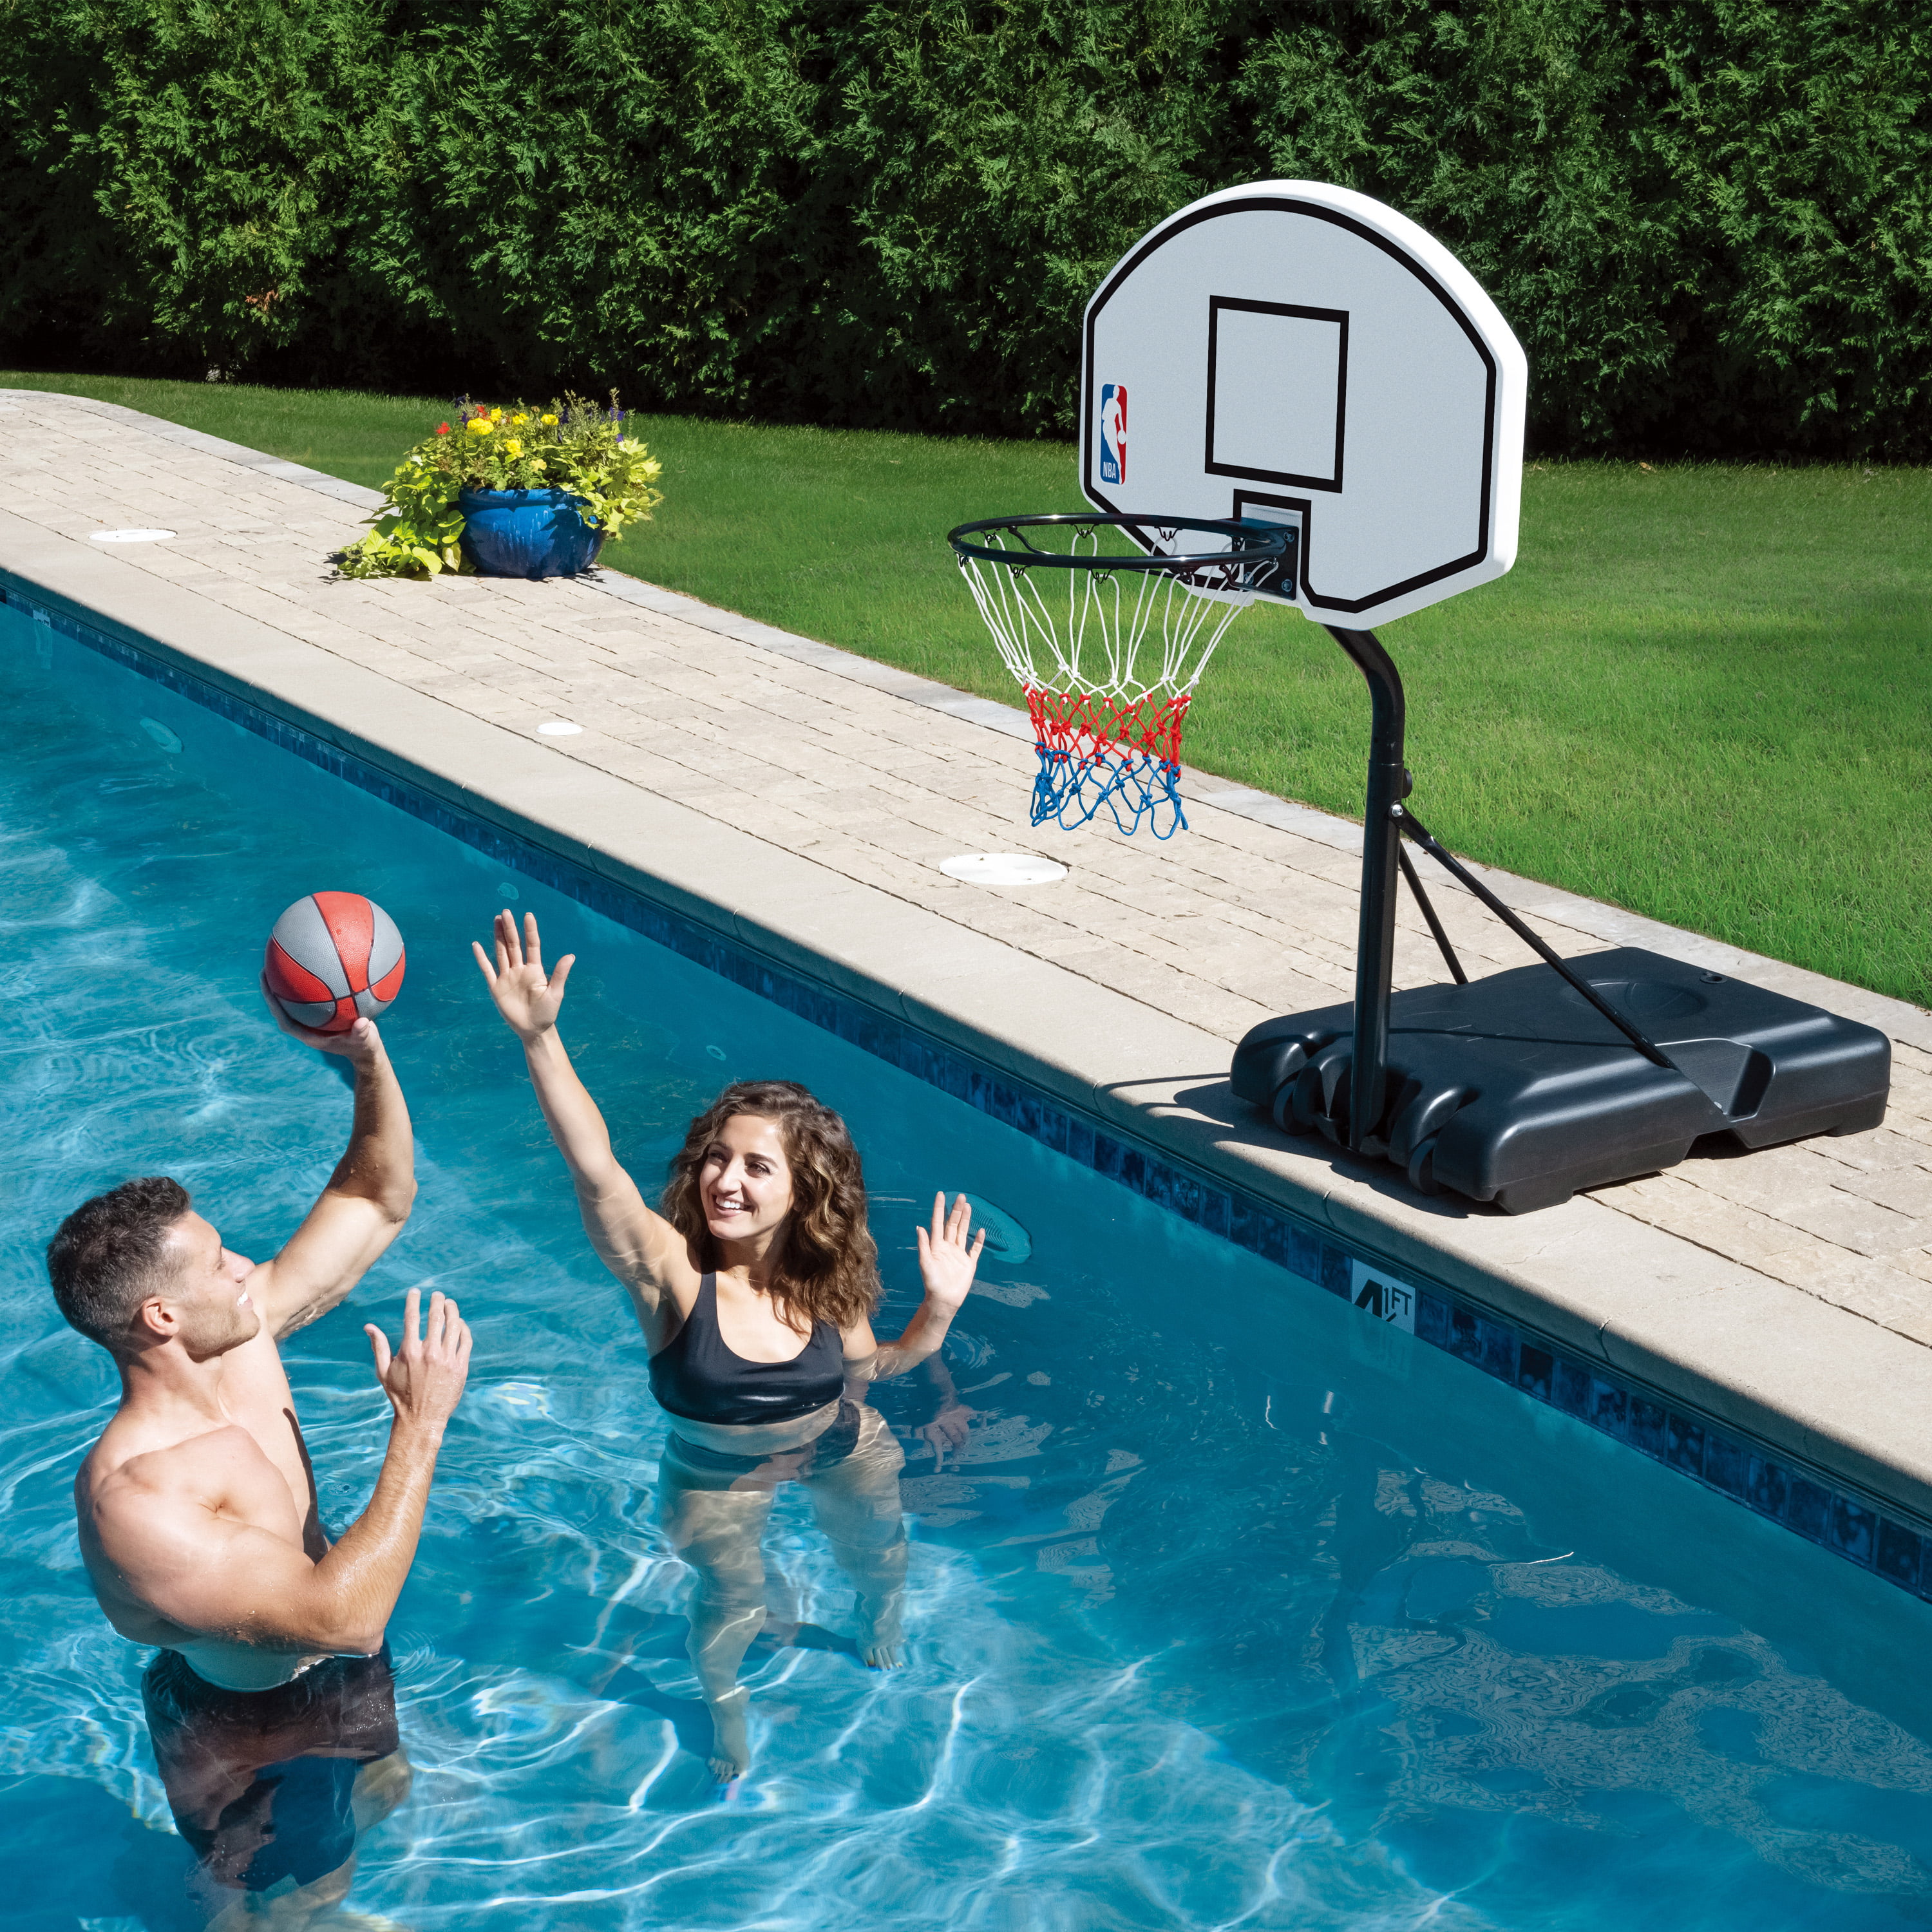 KLB Sport Height Adjustable Youth Portable Basketball Hoop System W/ Wheels  28 for sale online | eBay